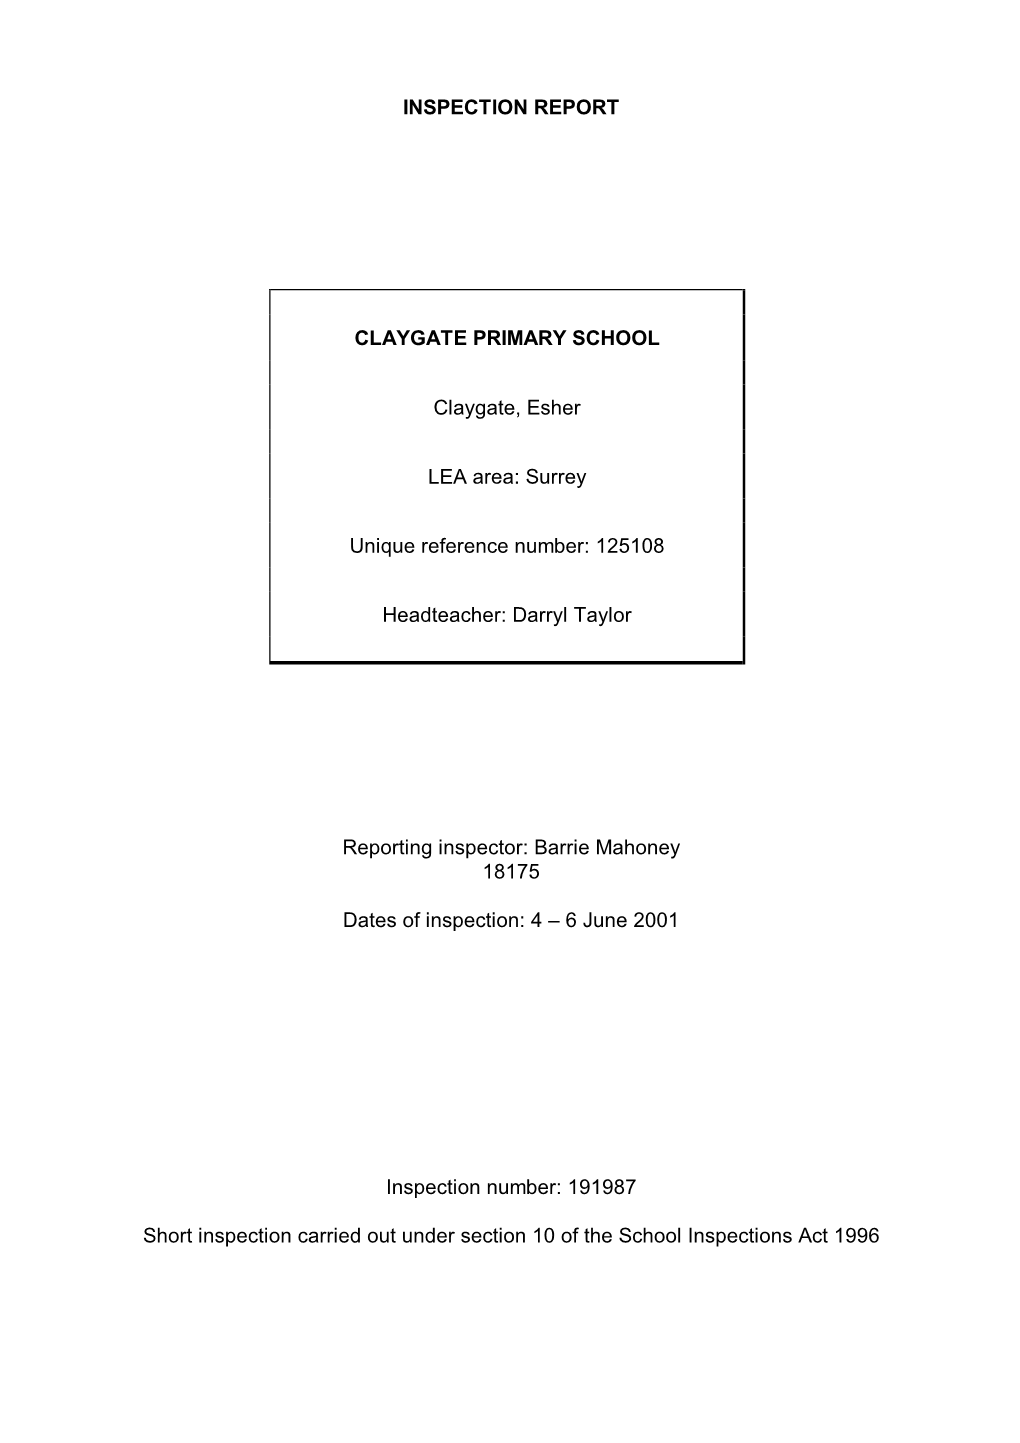 INSPECTION REPORT CLAYGATE PRIMARY SCHOOL Claygate